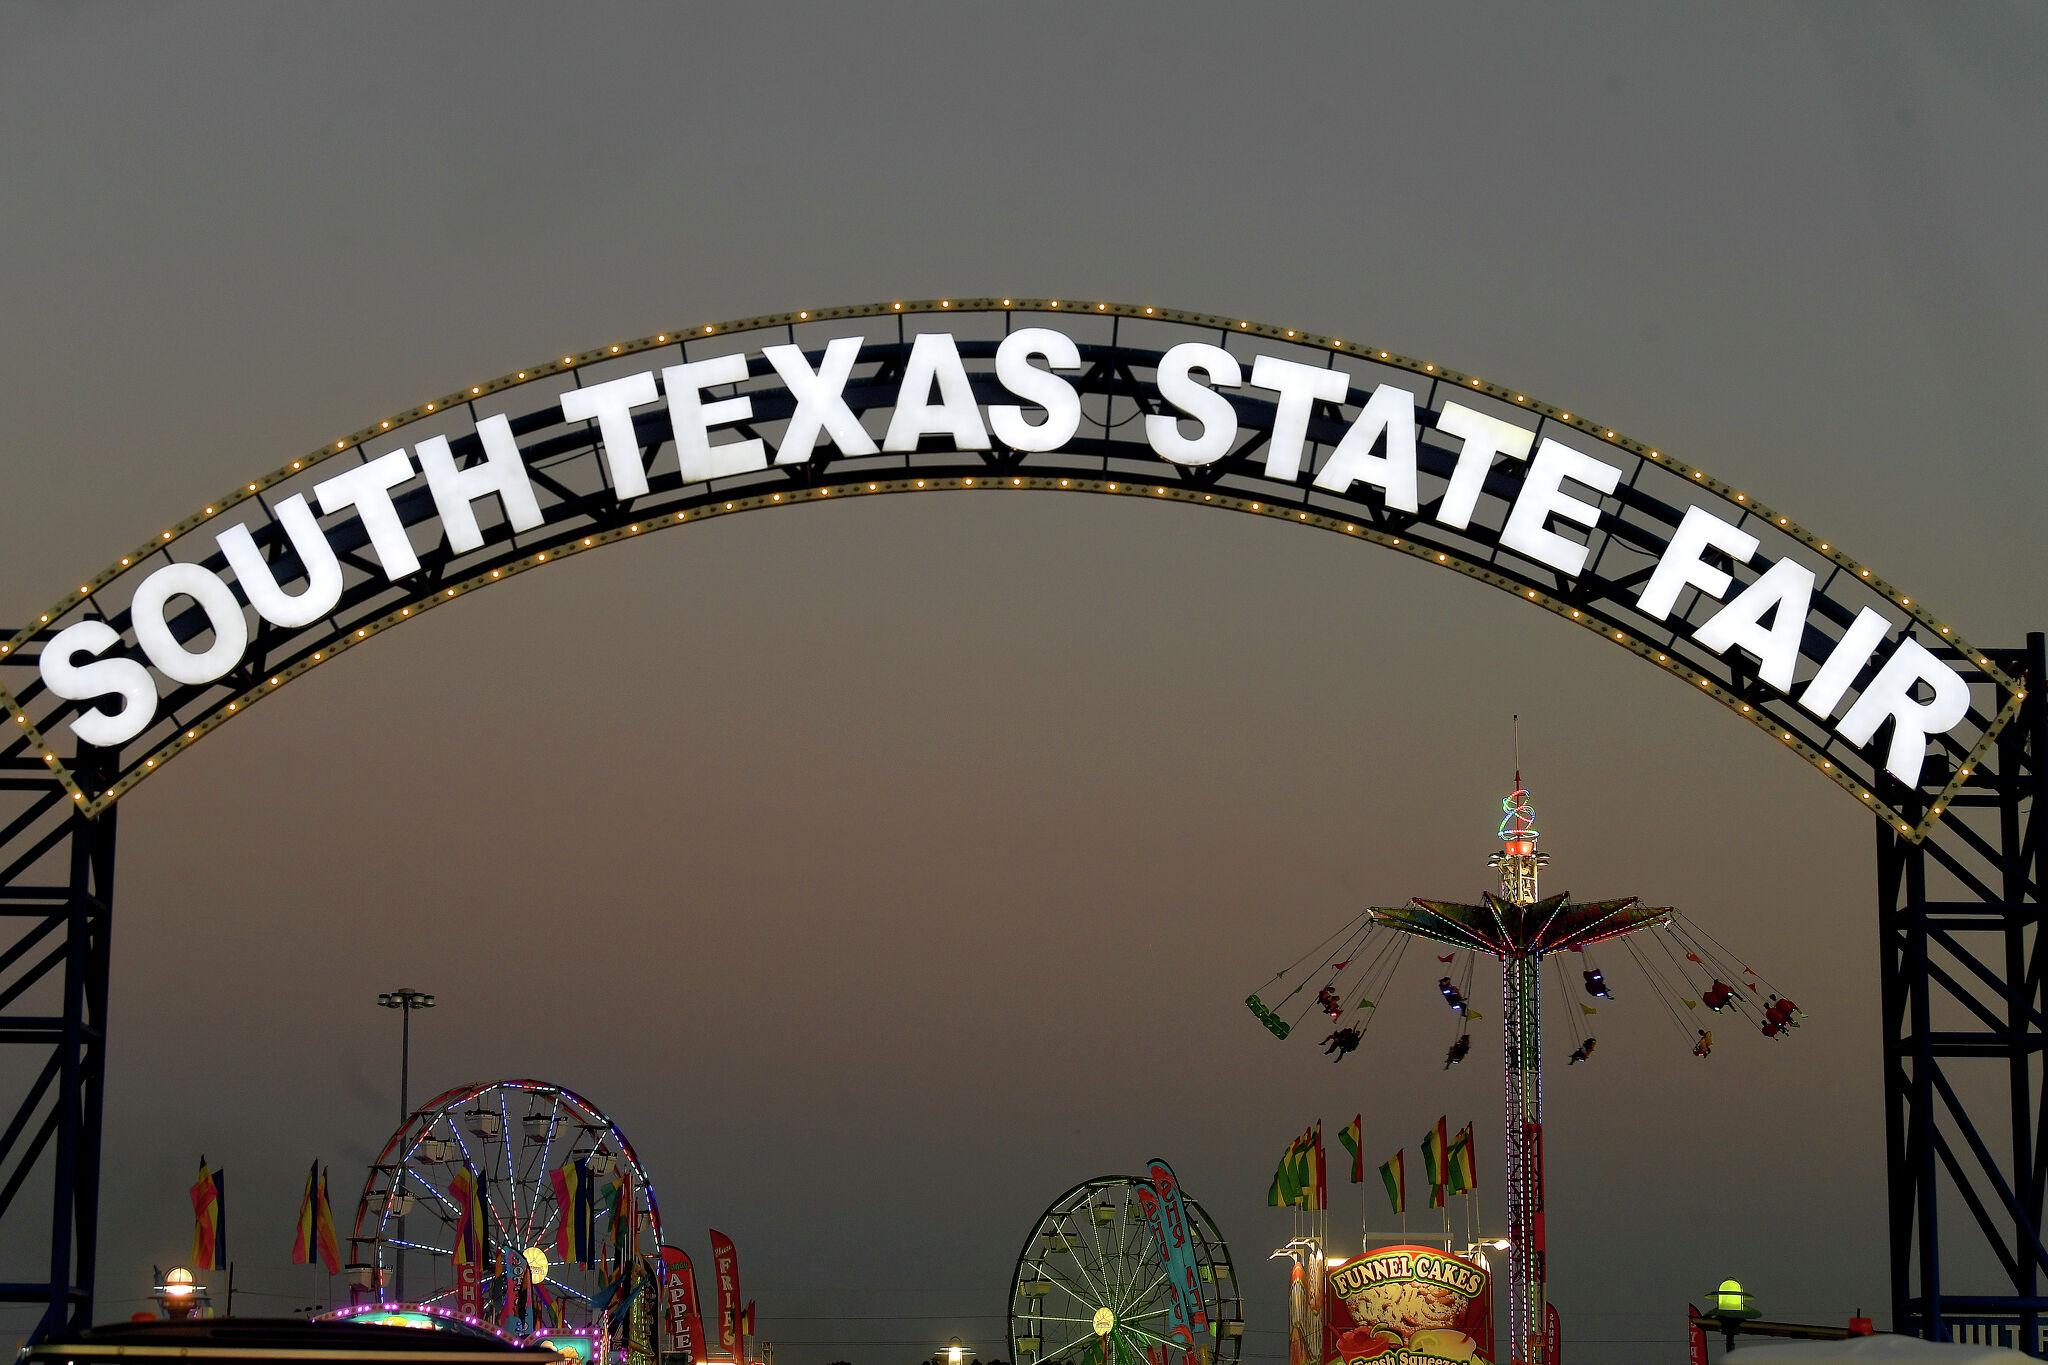 The first weekend at the South Texas State Fair packed the house